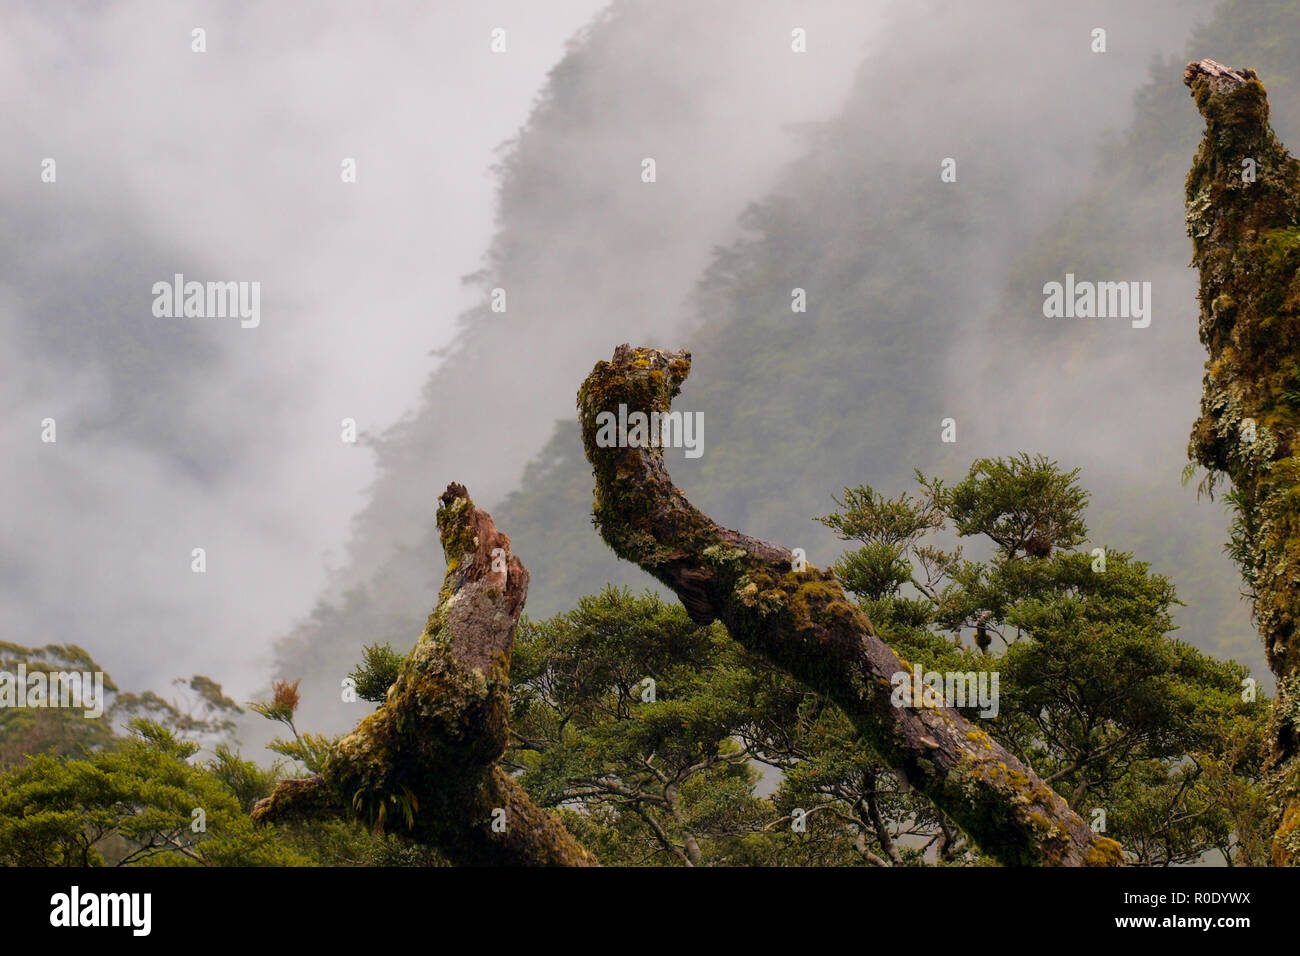 Mossy branches in a misty mountain landscape on new zealands south island Stock Photo